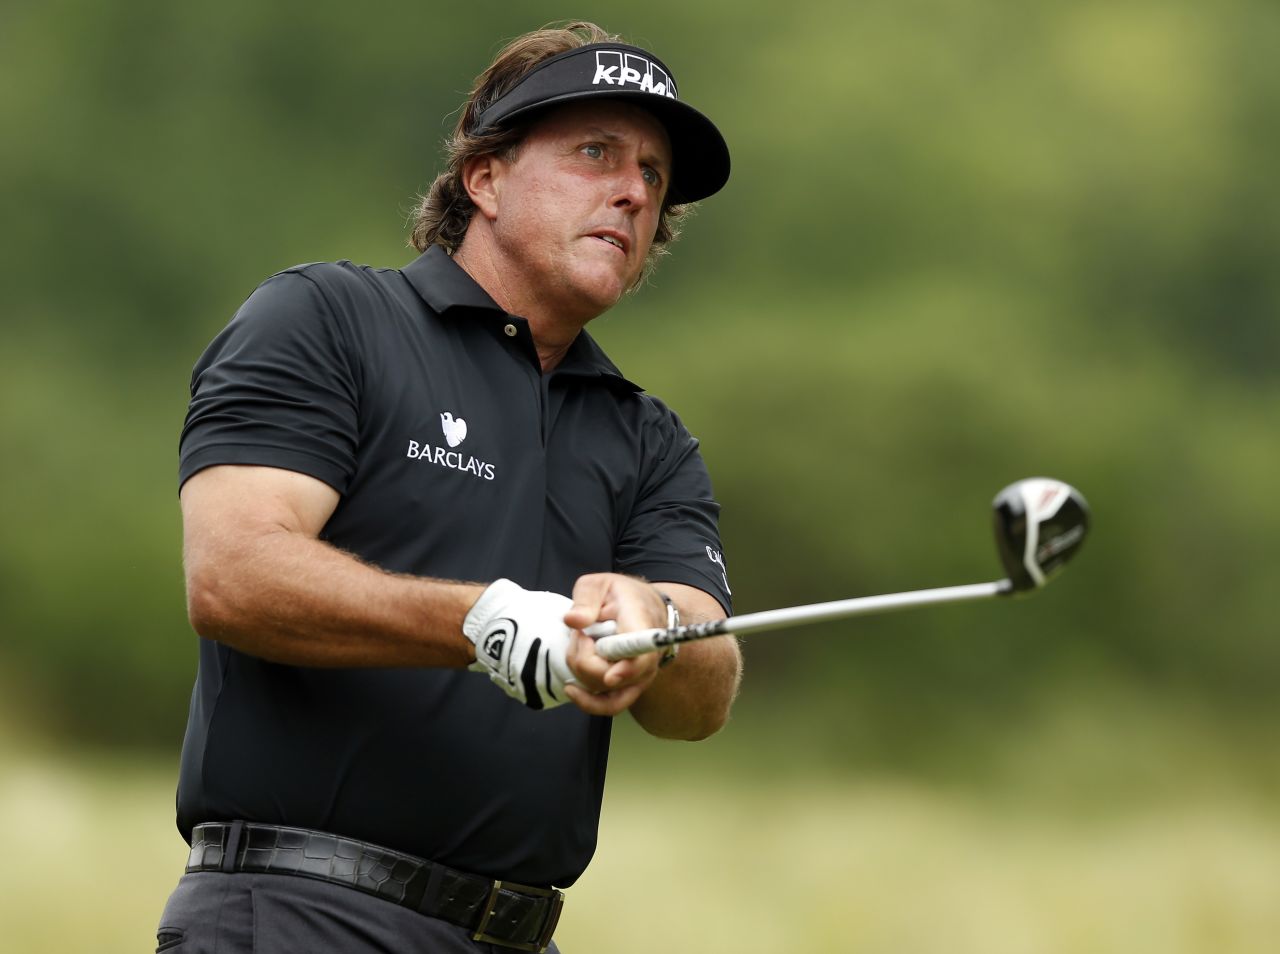 Phil Mickelson of the U.S. watches his shot from the tee of the second hole on June 13.